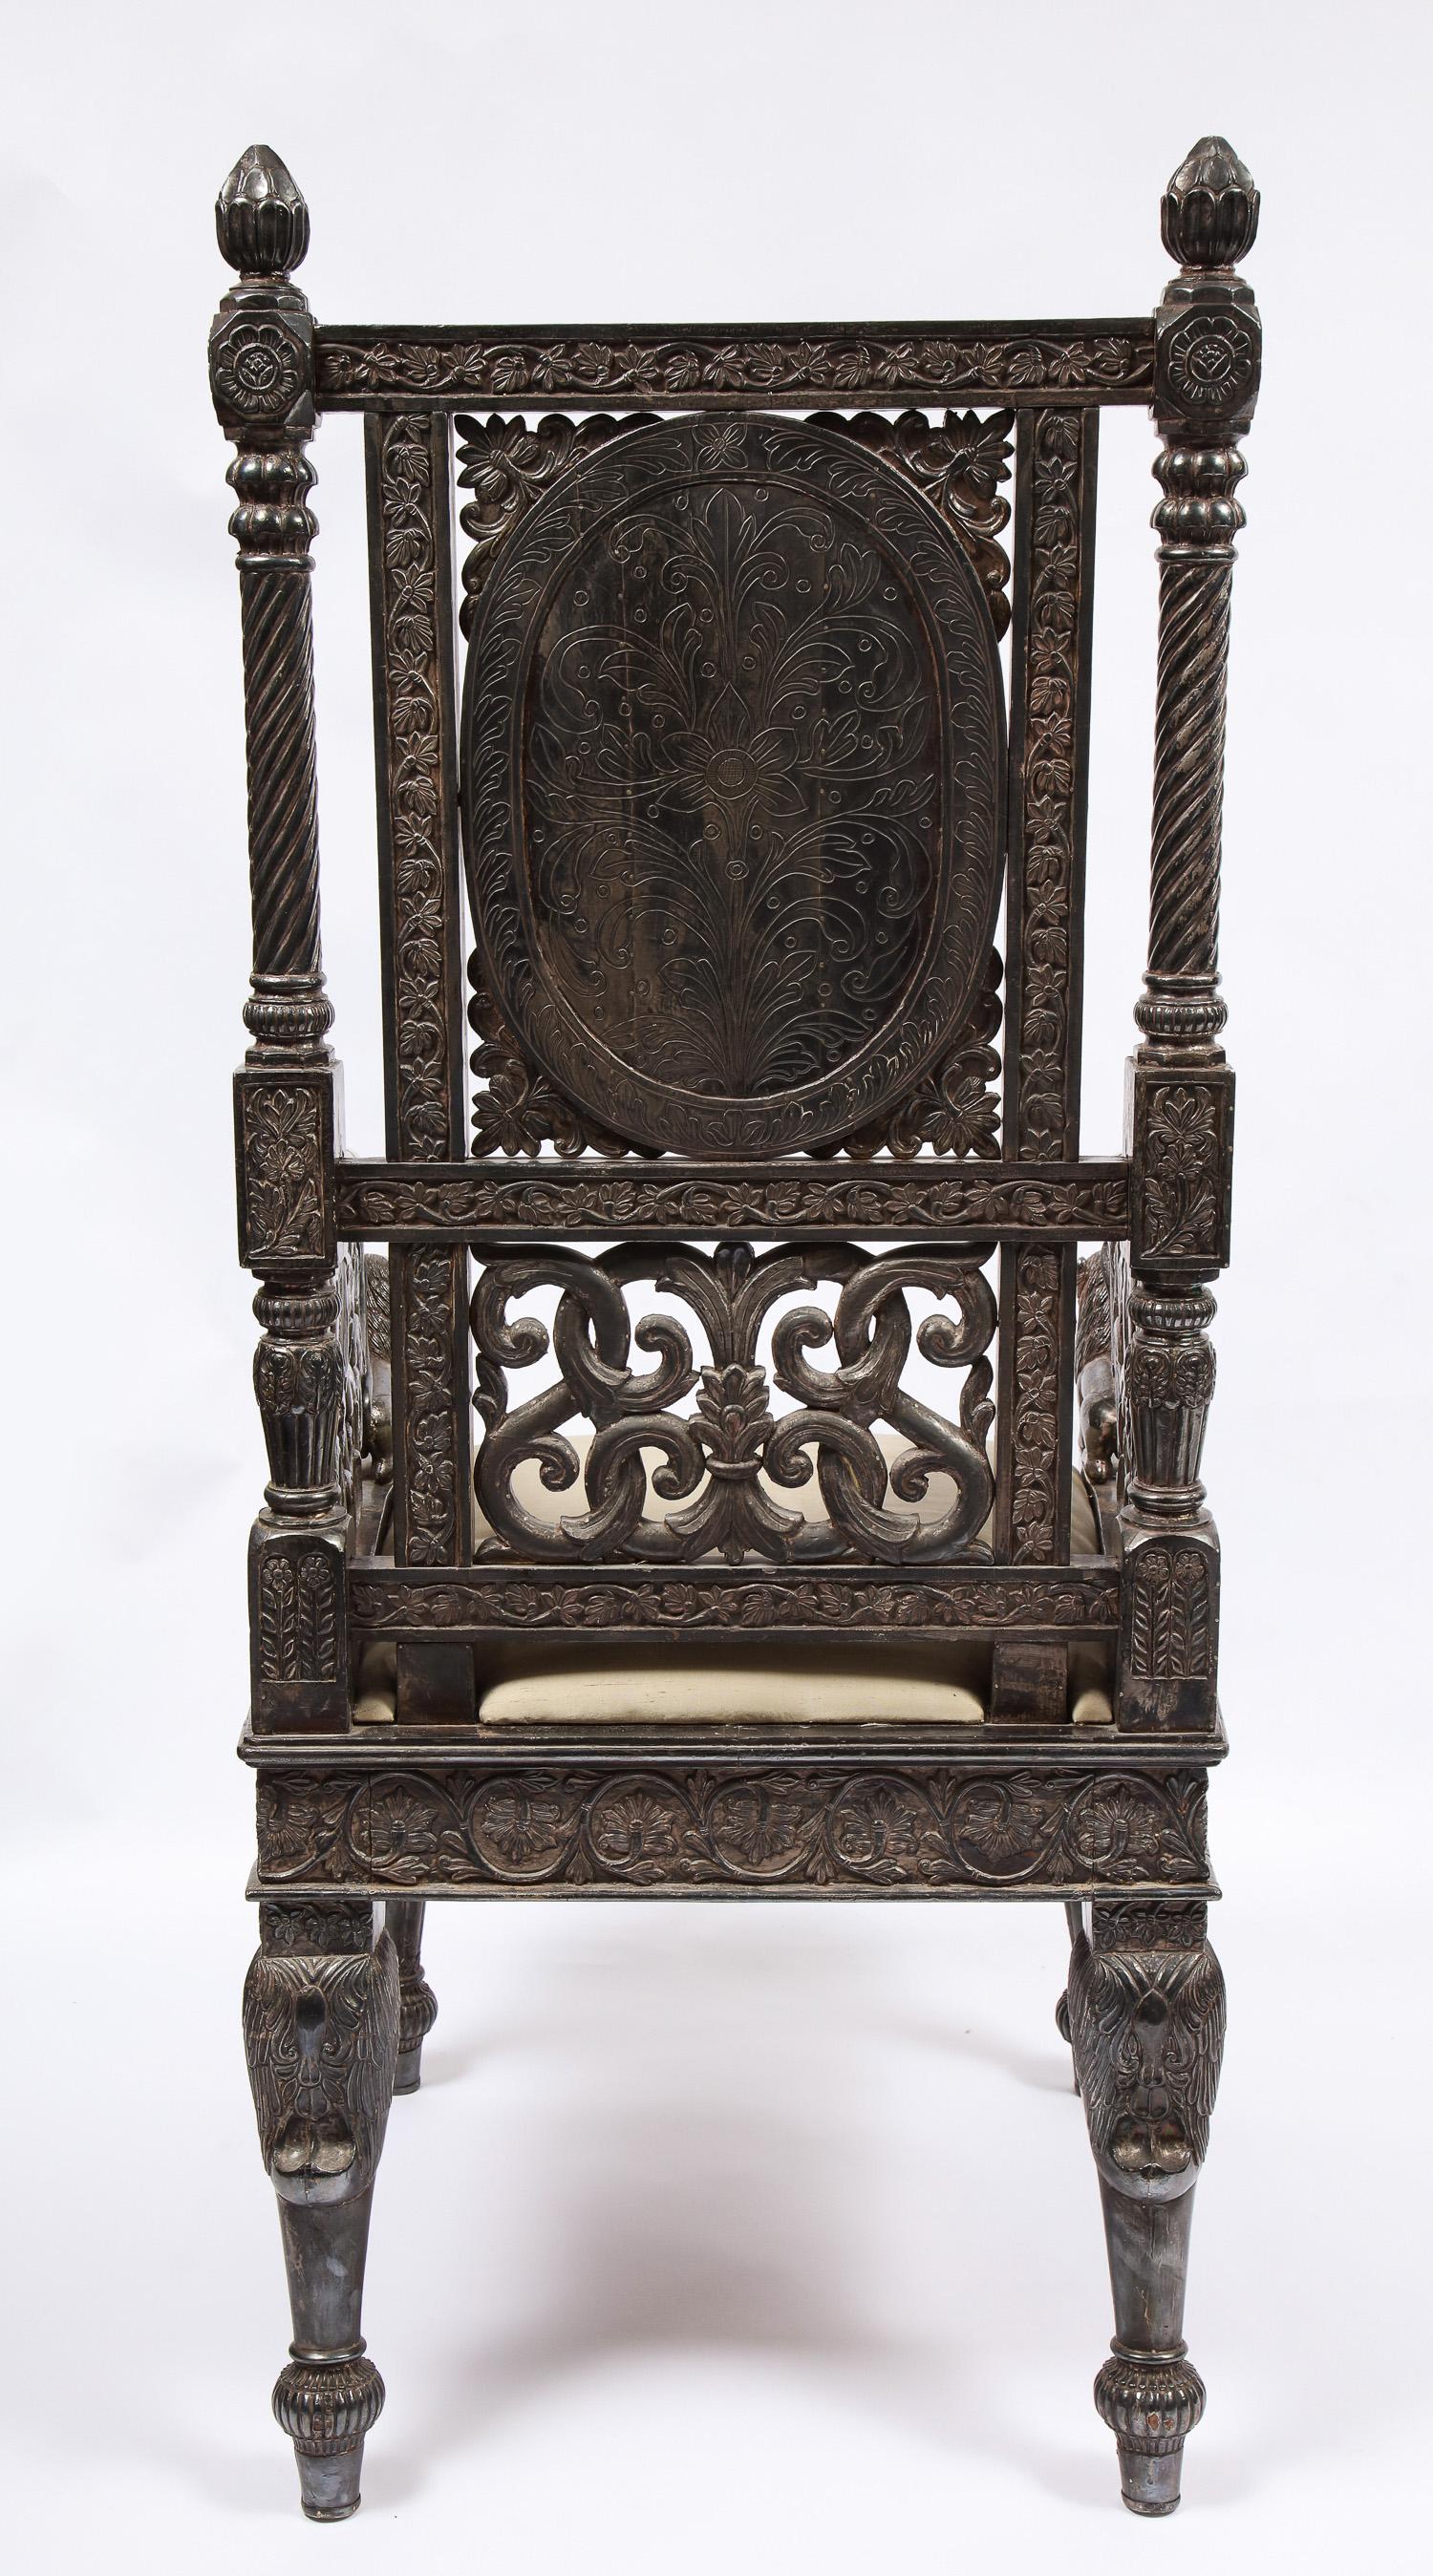 Indian Mogul Style Silver-Clad Gilded Ceremonial Throne Chair for the Maharajah For Sale 6